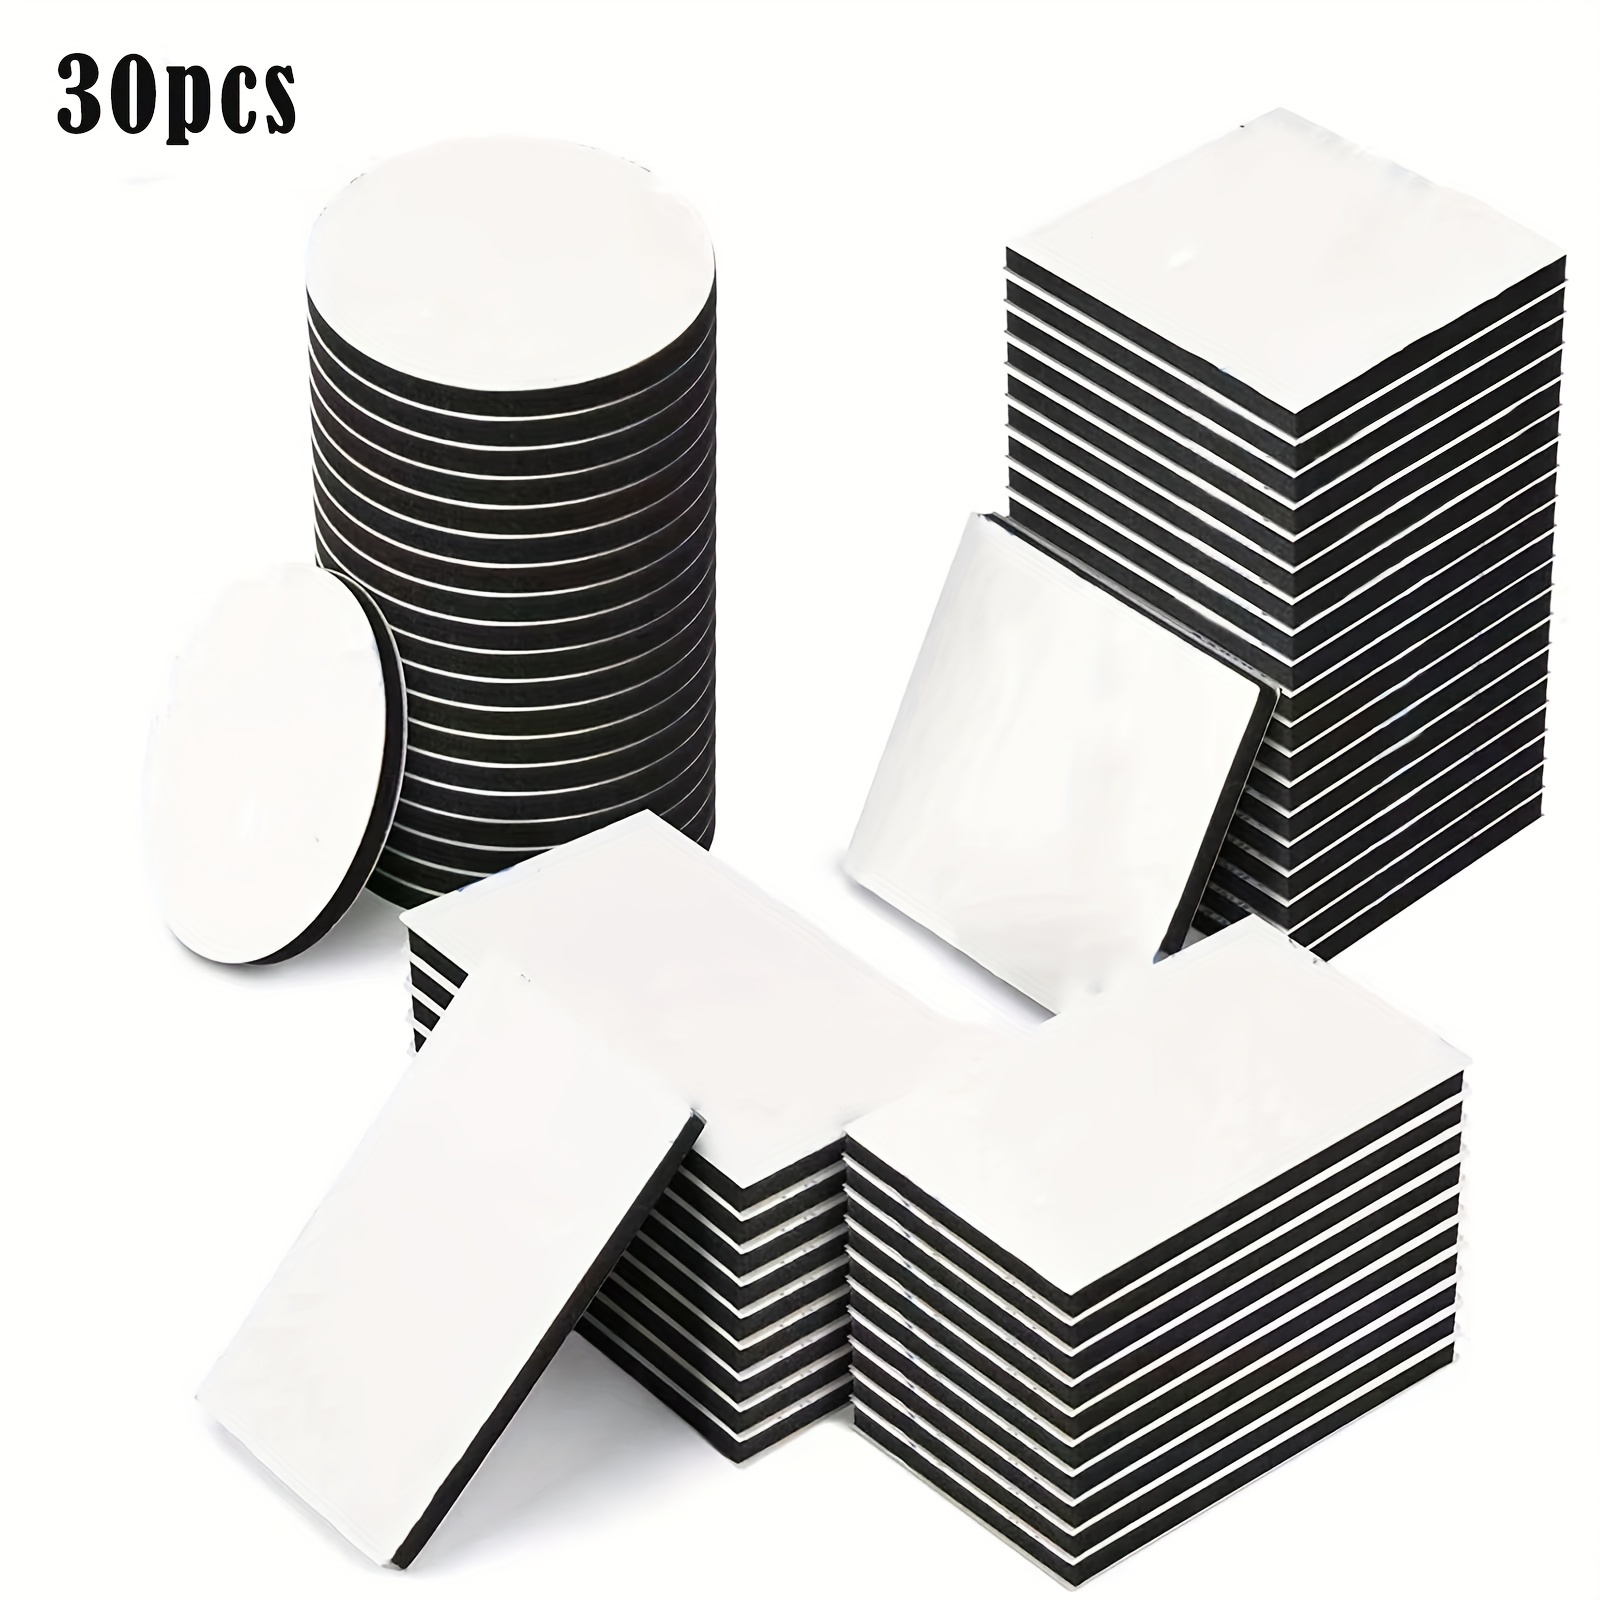  3M Square Tape Double Sided Adhesive Pads Extra Strong for  Walls Floors Doors Plastics : Office Products